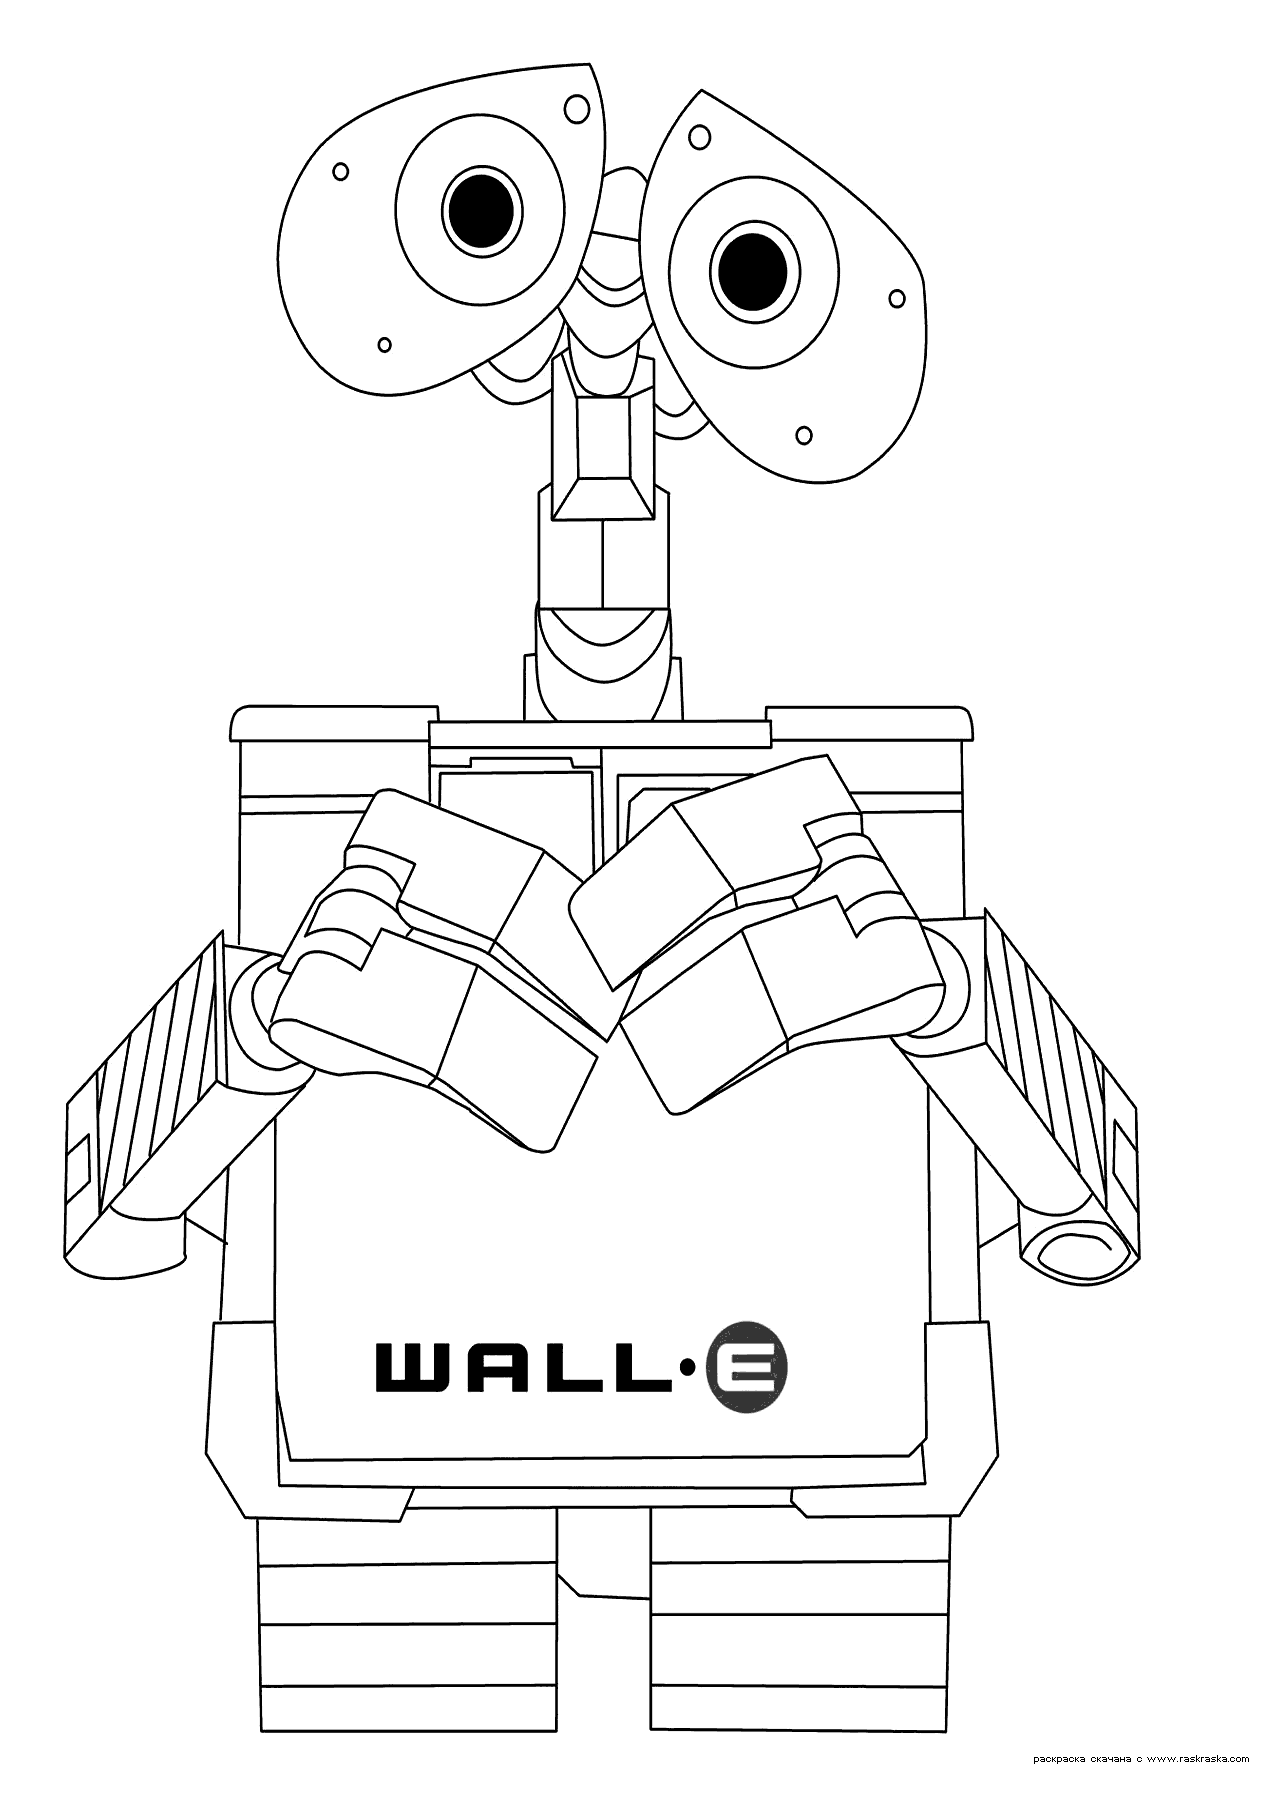 wall e colouring pages kids n funcom 59 coloring pages of wall e e colouring pages wall 